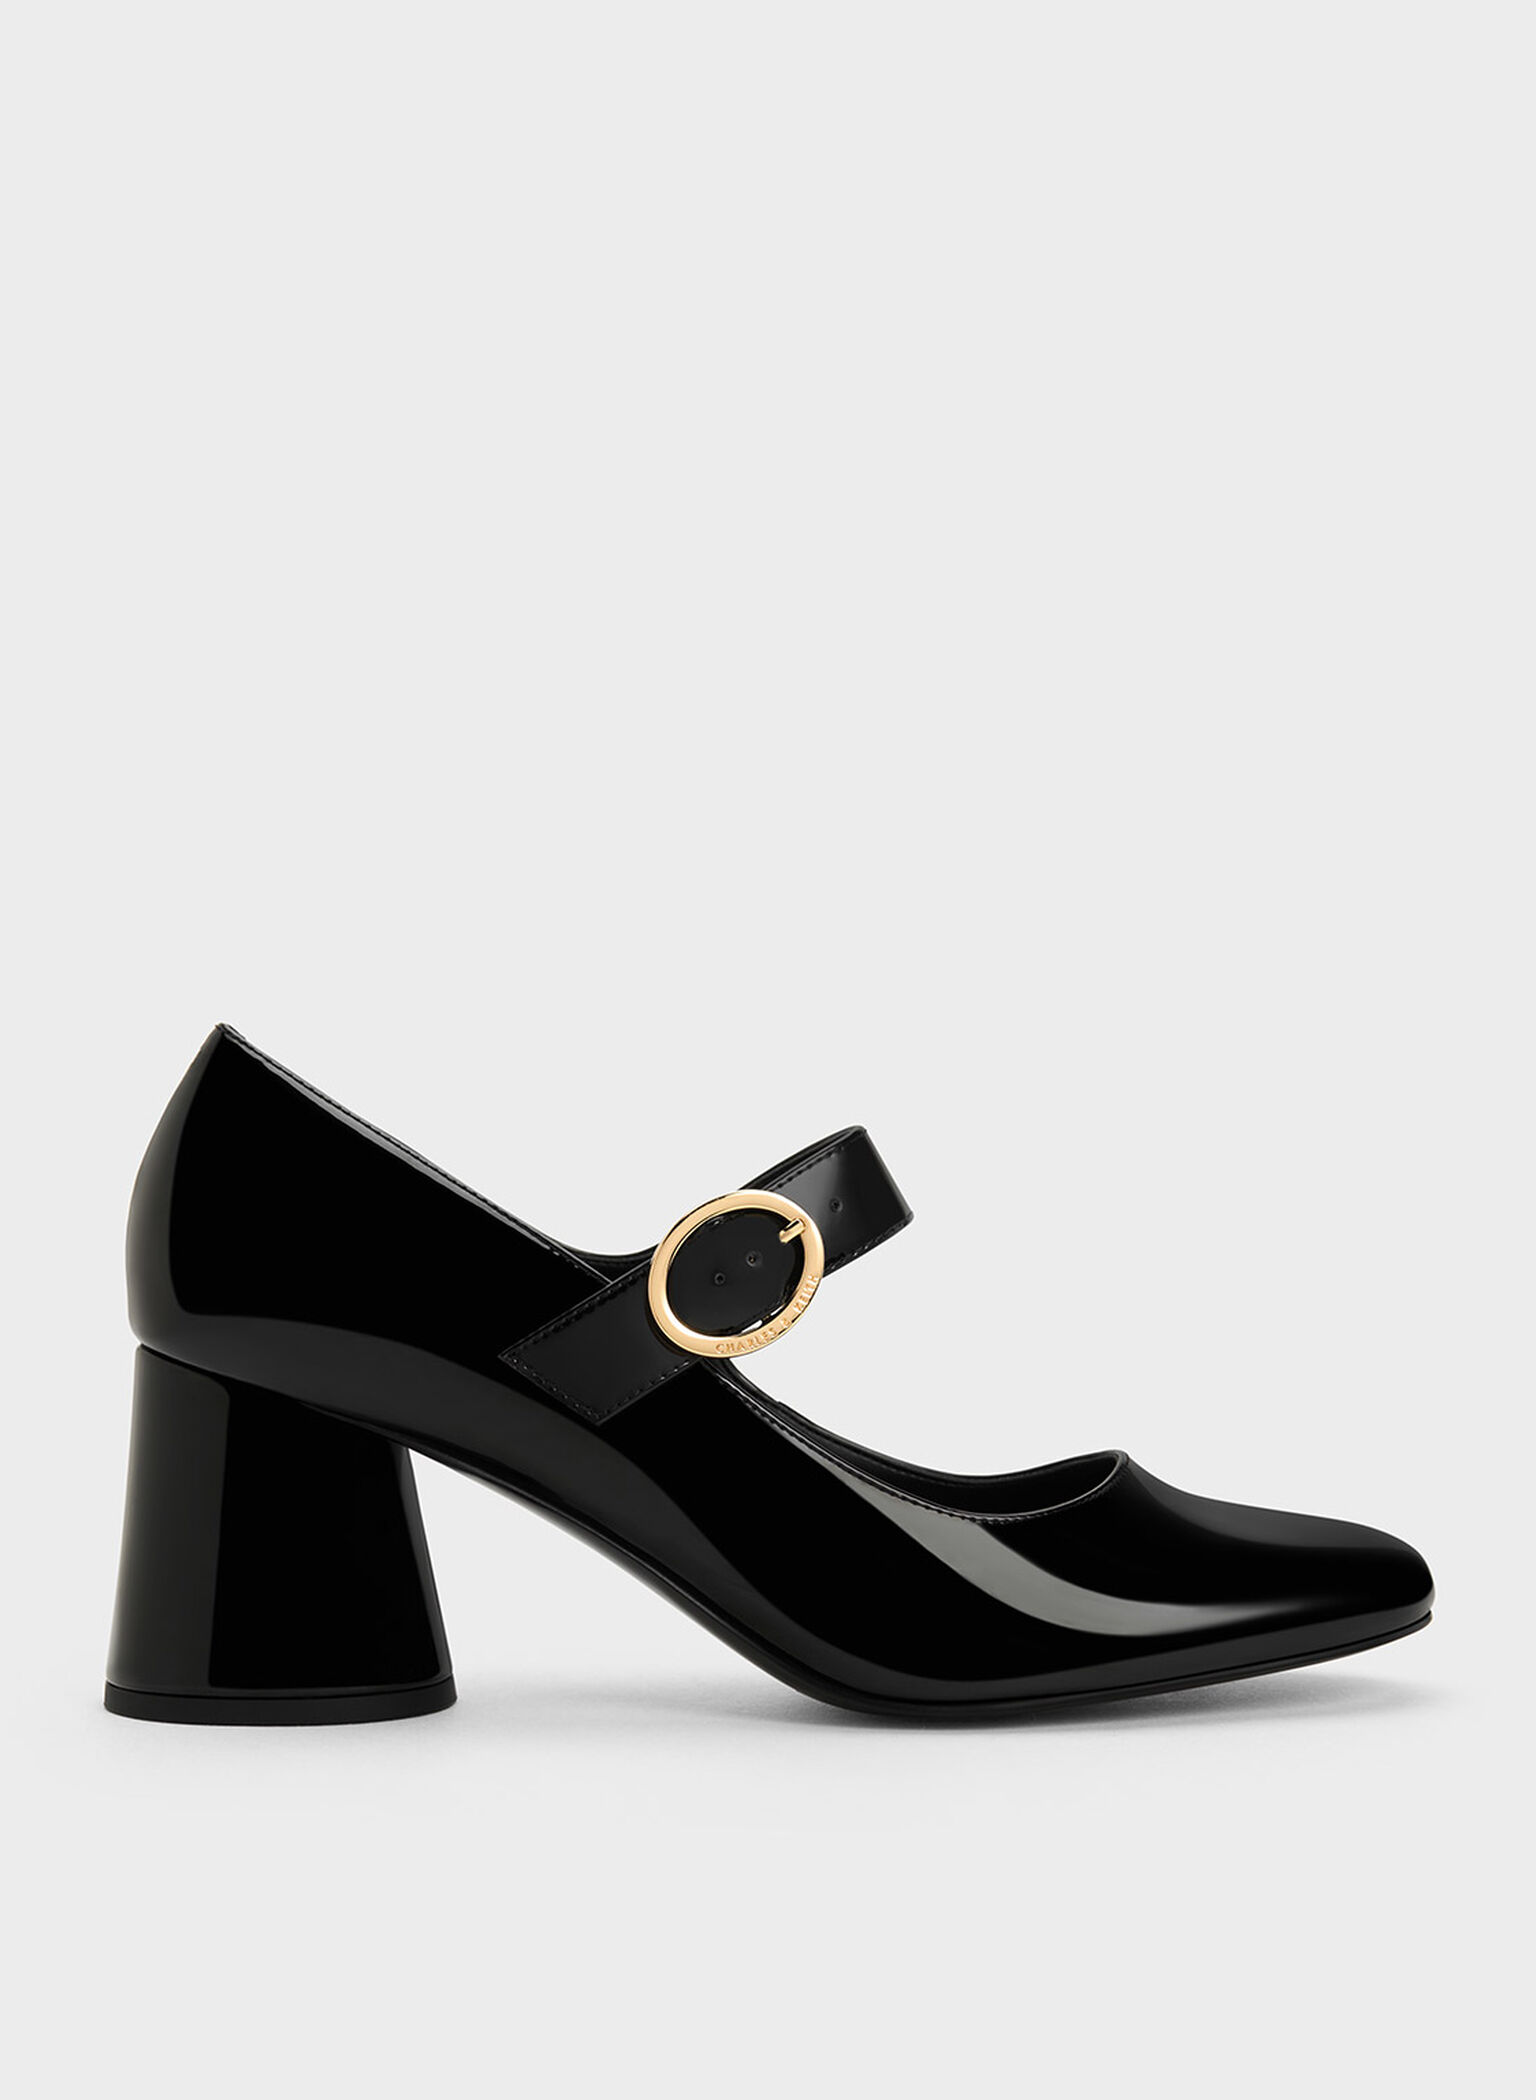 Black Patent Patent Cylindrical Block Heel Mary Janes - CHARLES & KEITH US